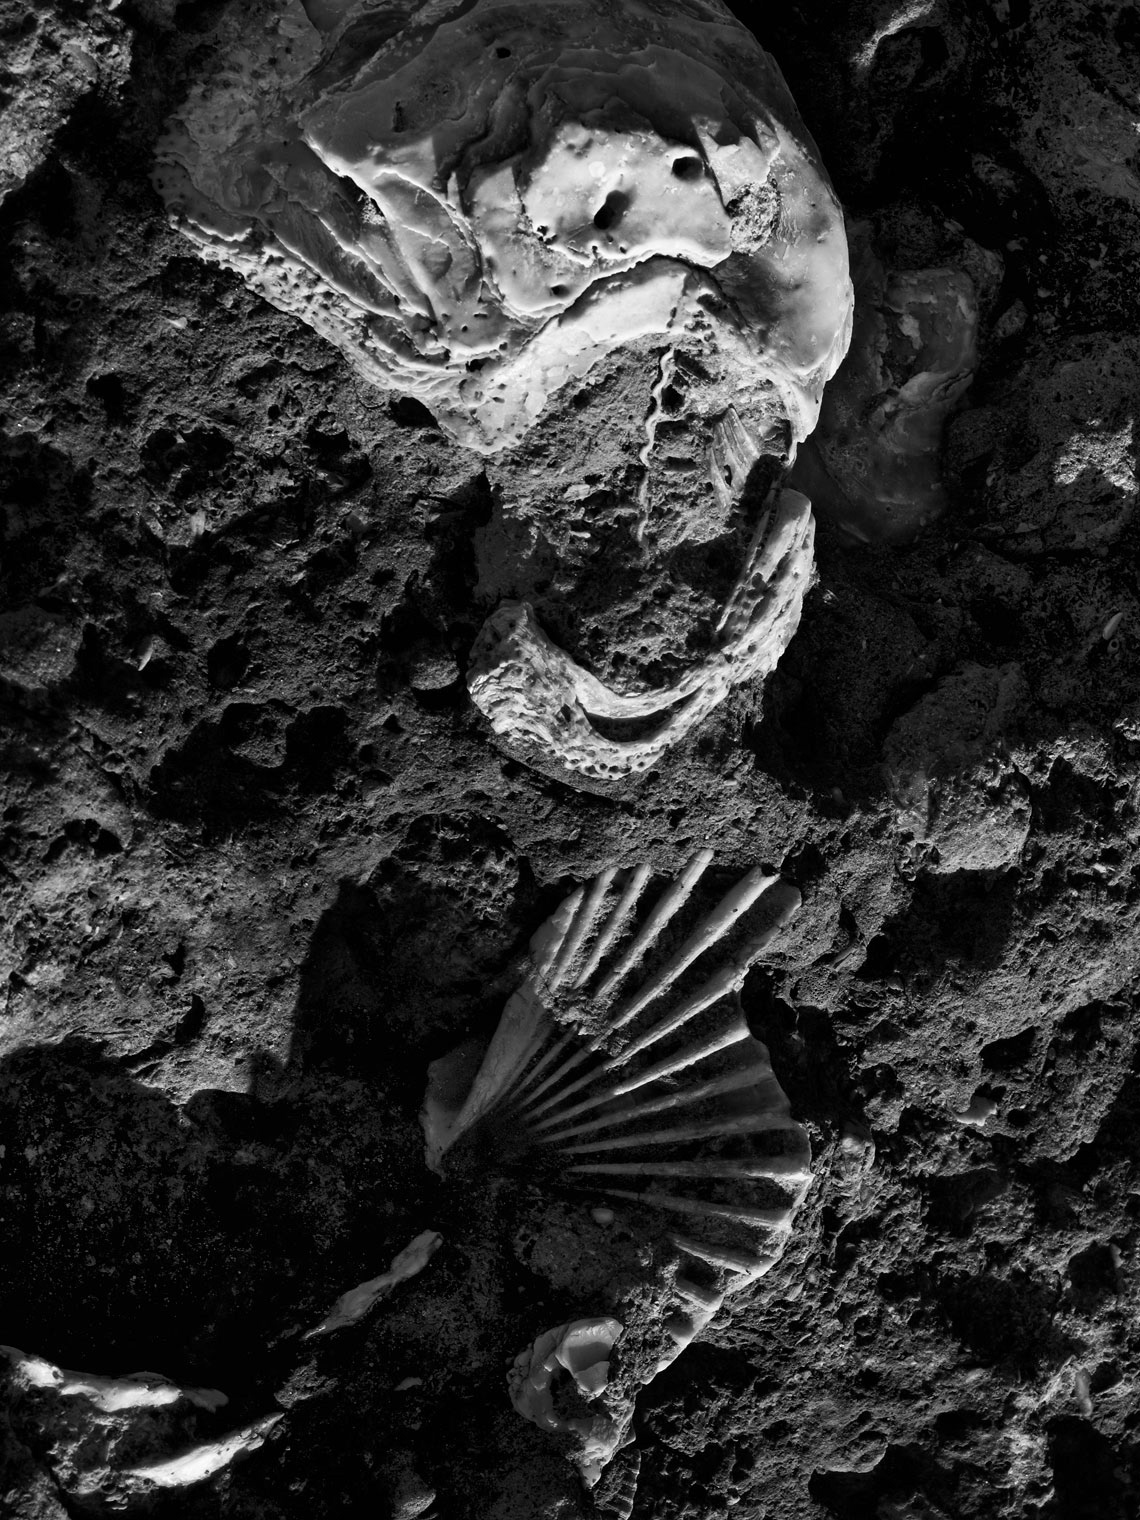 fine art photography textures alien battles bones fossils black & white black and white image ancient old left behind horizontal surfaces shells seashells remains